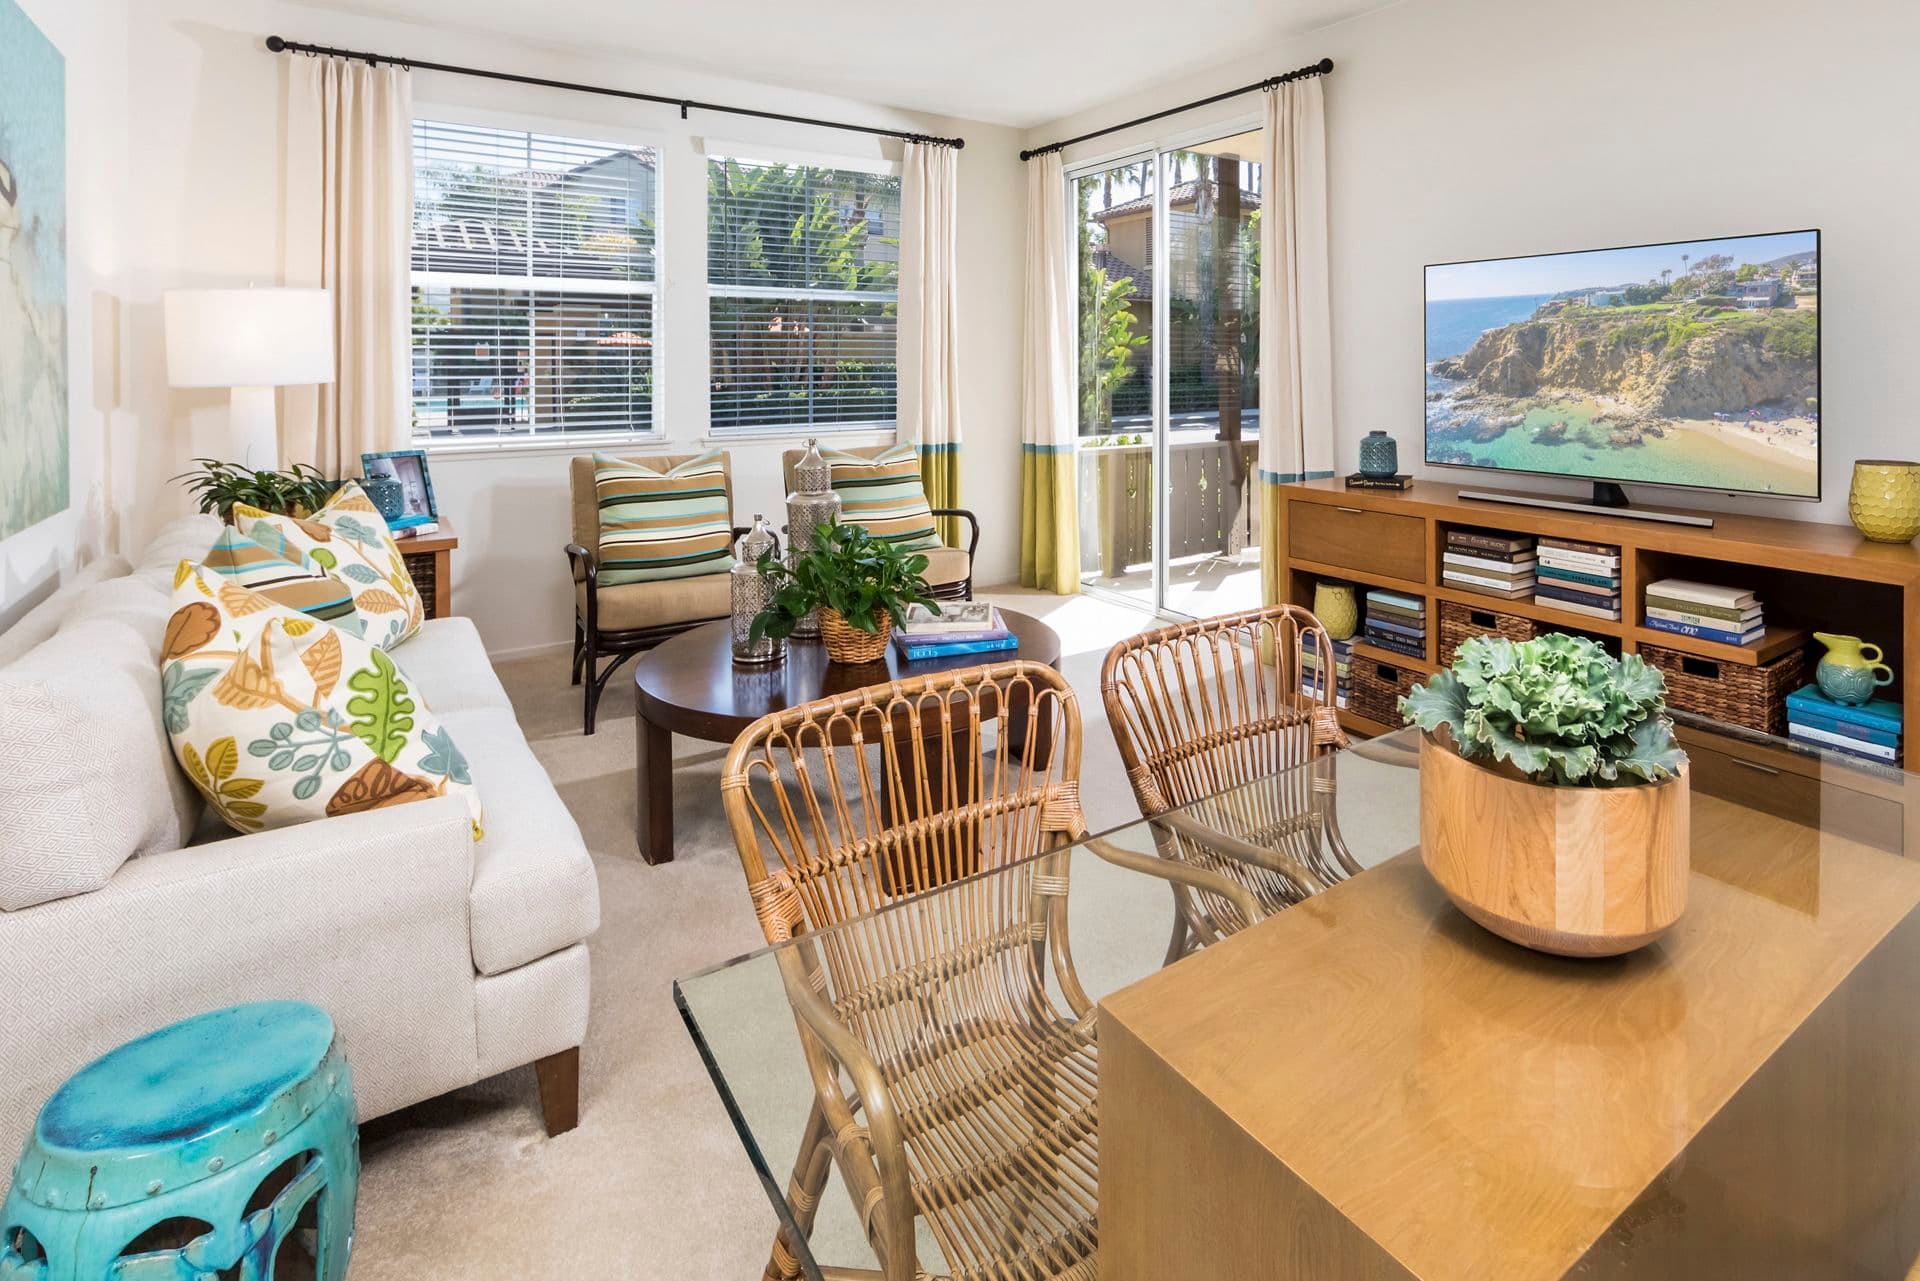 Interior view of living room and dining room at Solana Apartment Homes in Irvine, CA.